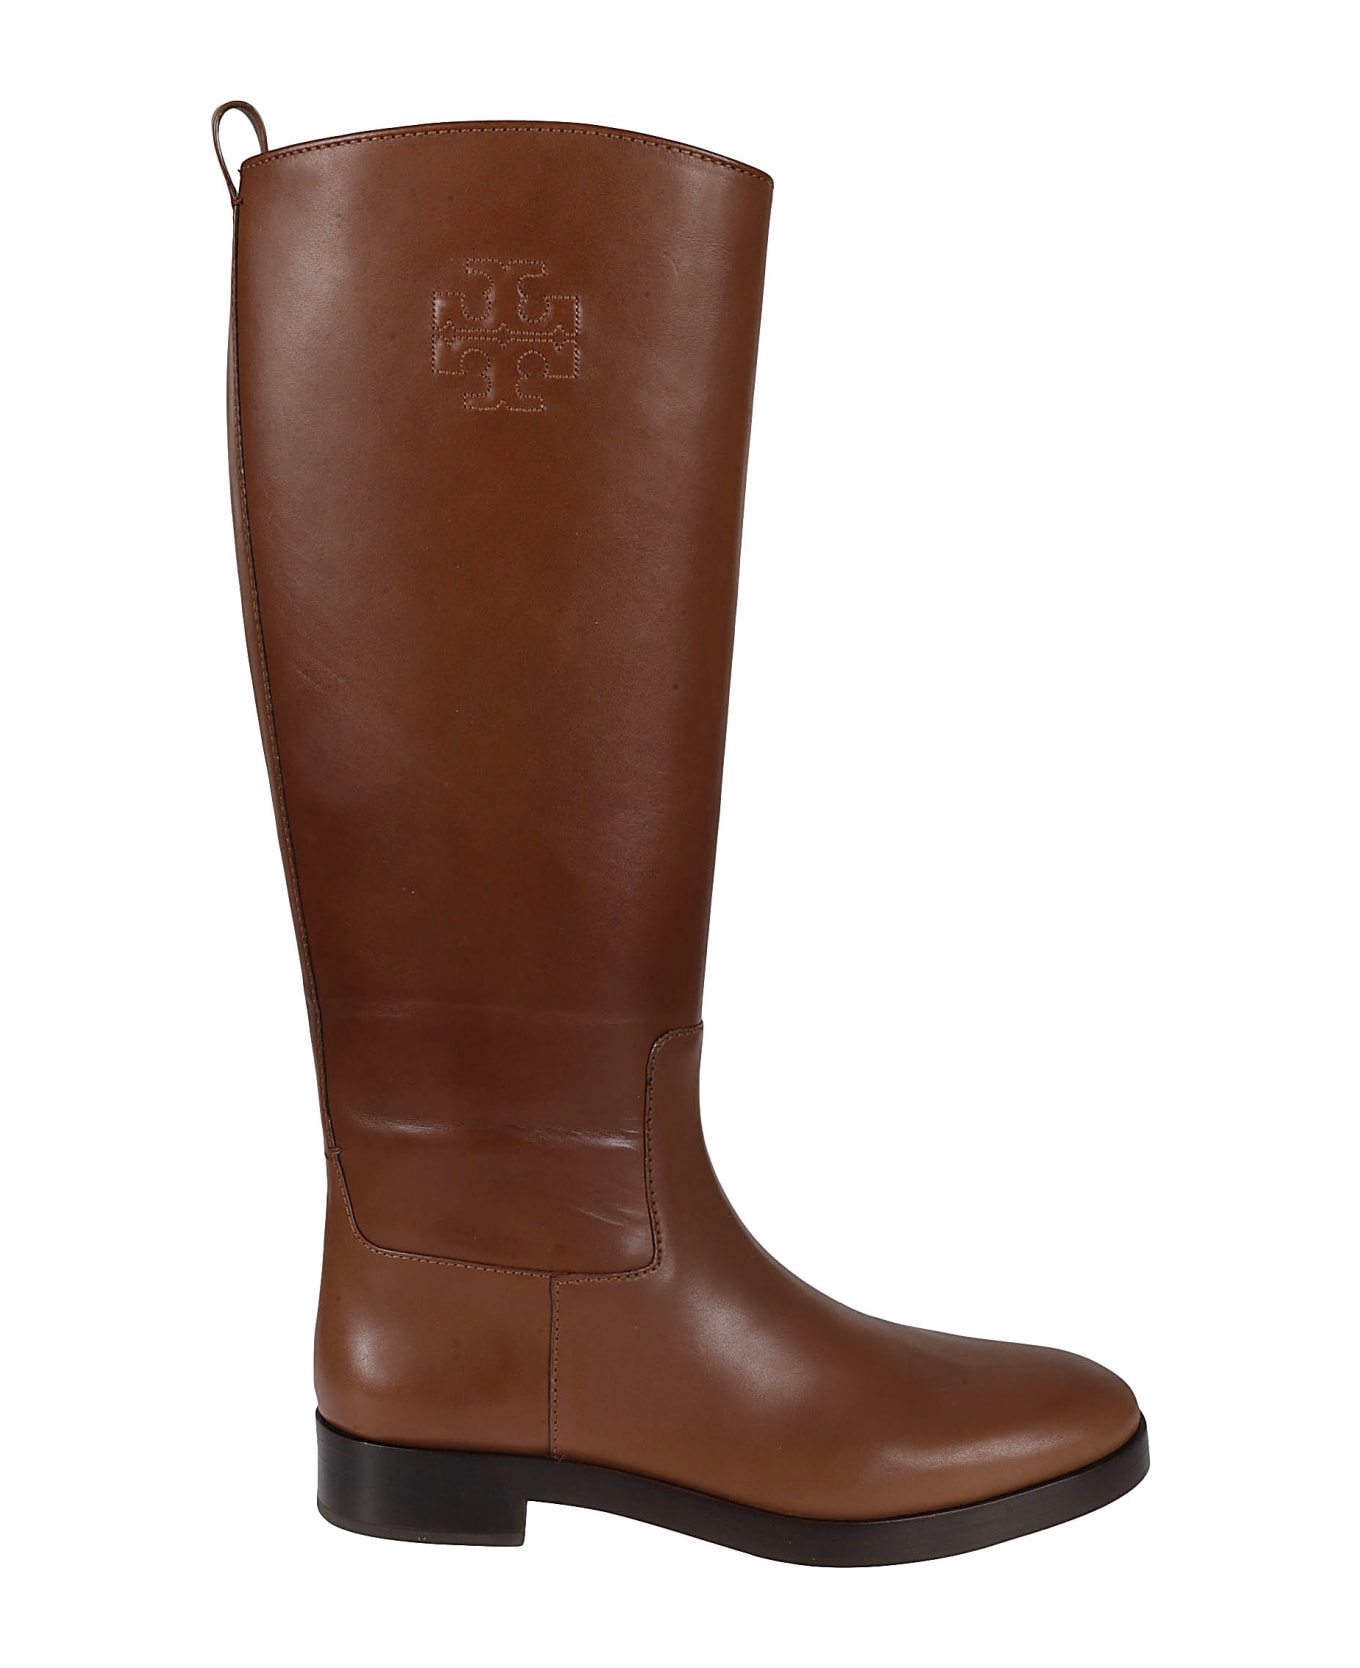 Tory Burch The Riding Over-the-knee Boots - PALISSANDRO